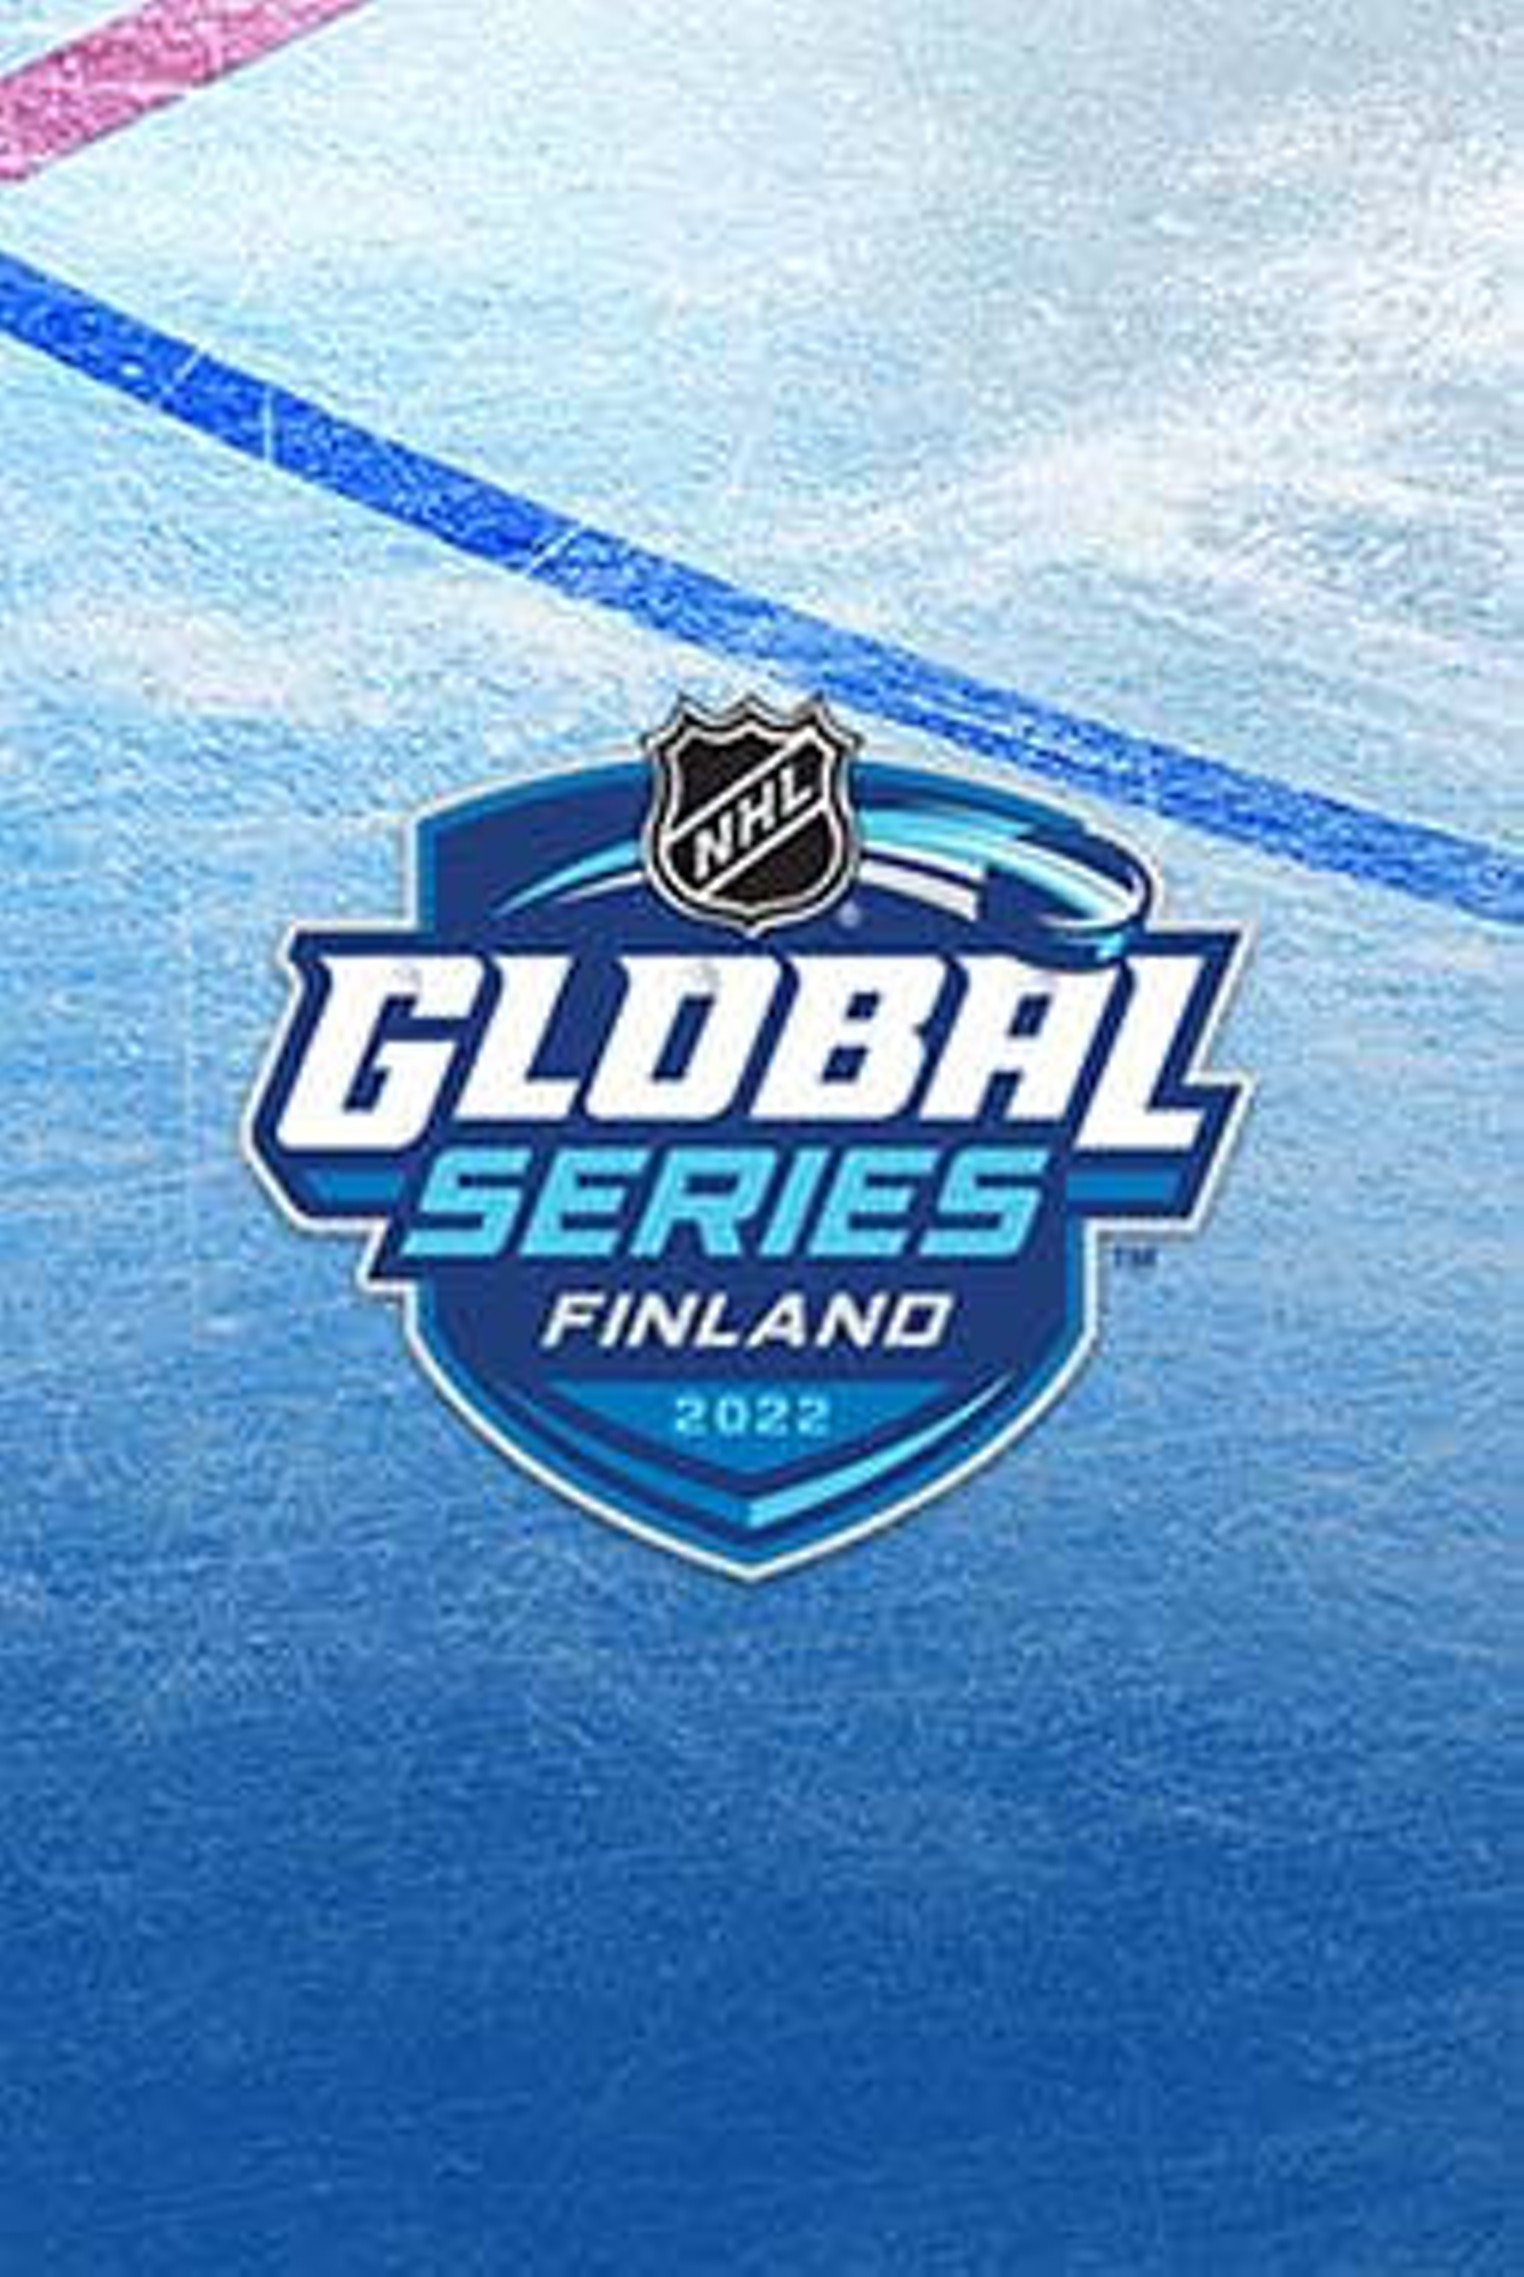 2022 NHL Global Series Finland x IMAX Live Colorado Avalanche vs Columbus Blue Jackets Denver Westword The Leading Independent News Source in Denver, Colorado